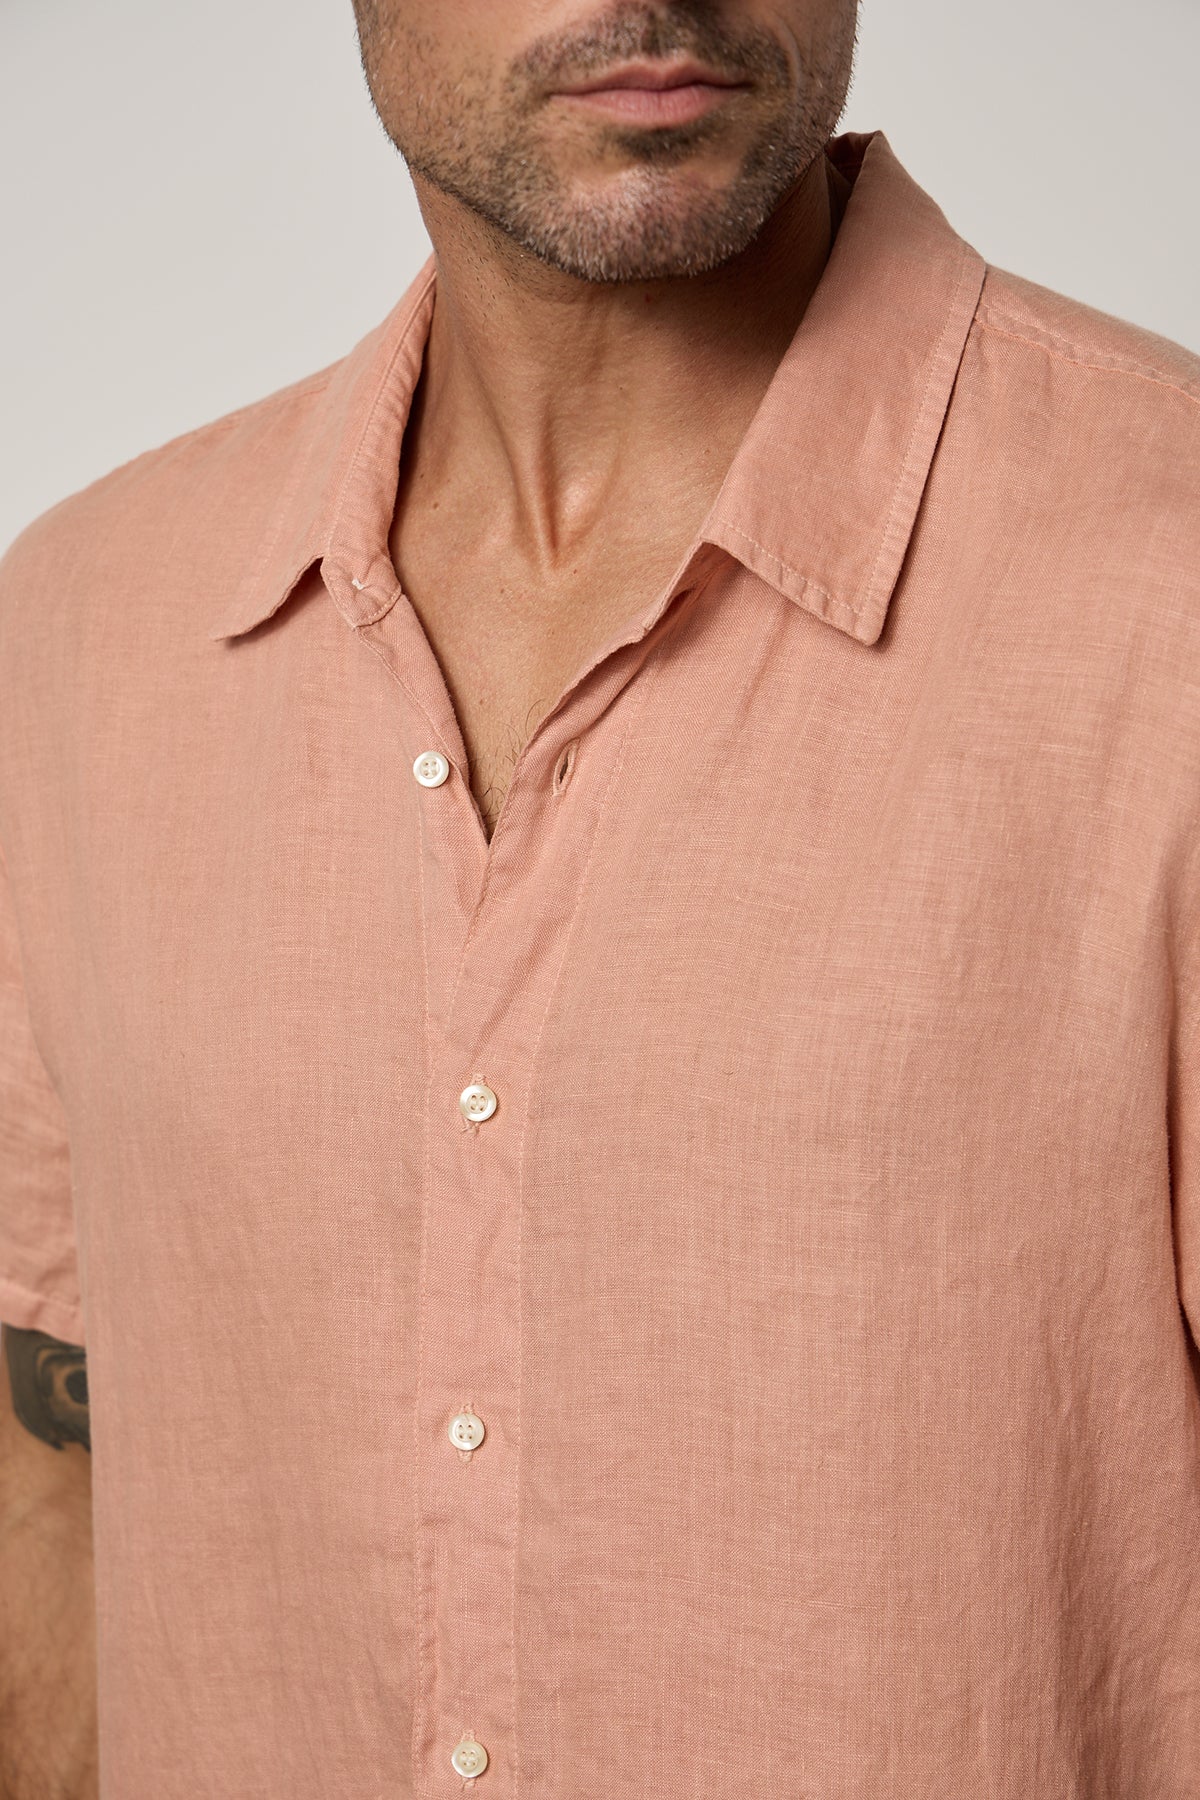 Mackie Button-Up Shirt in bronze close up front detail-26343177617601